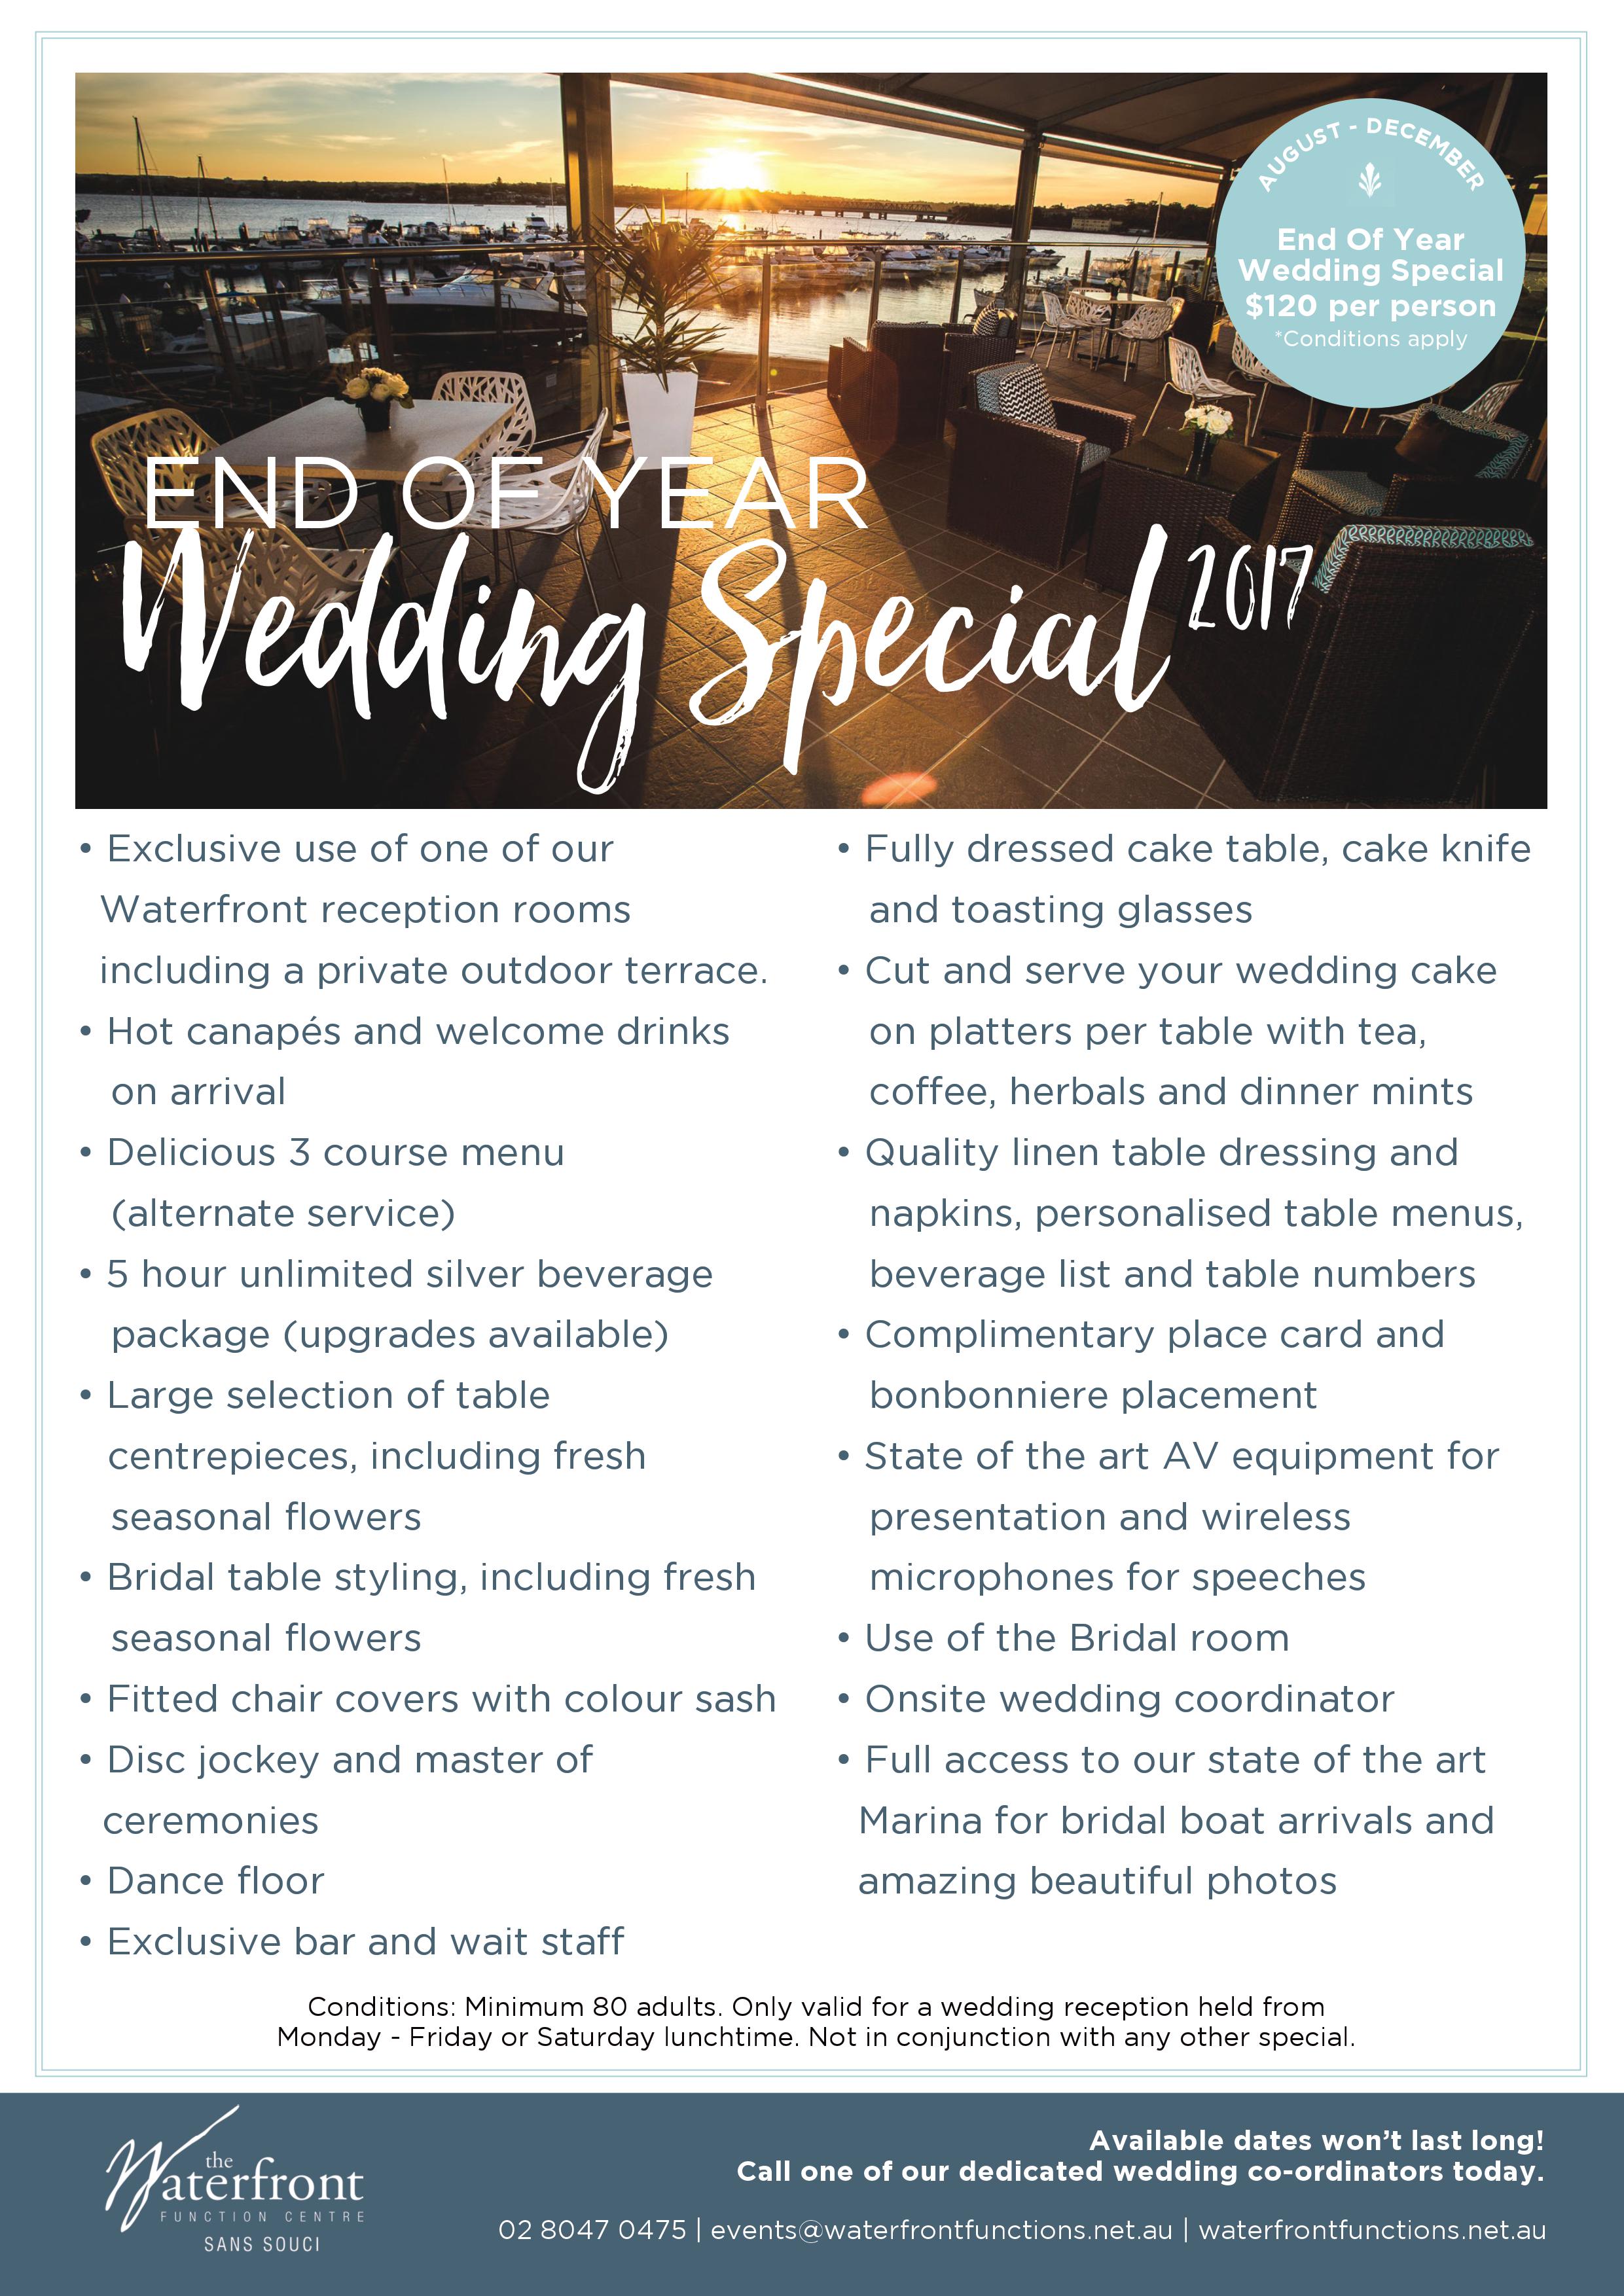 Waterfront End of Year Wedding Special